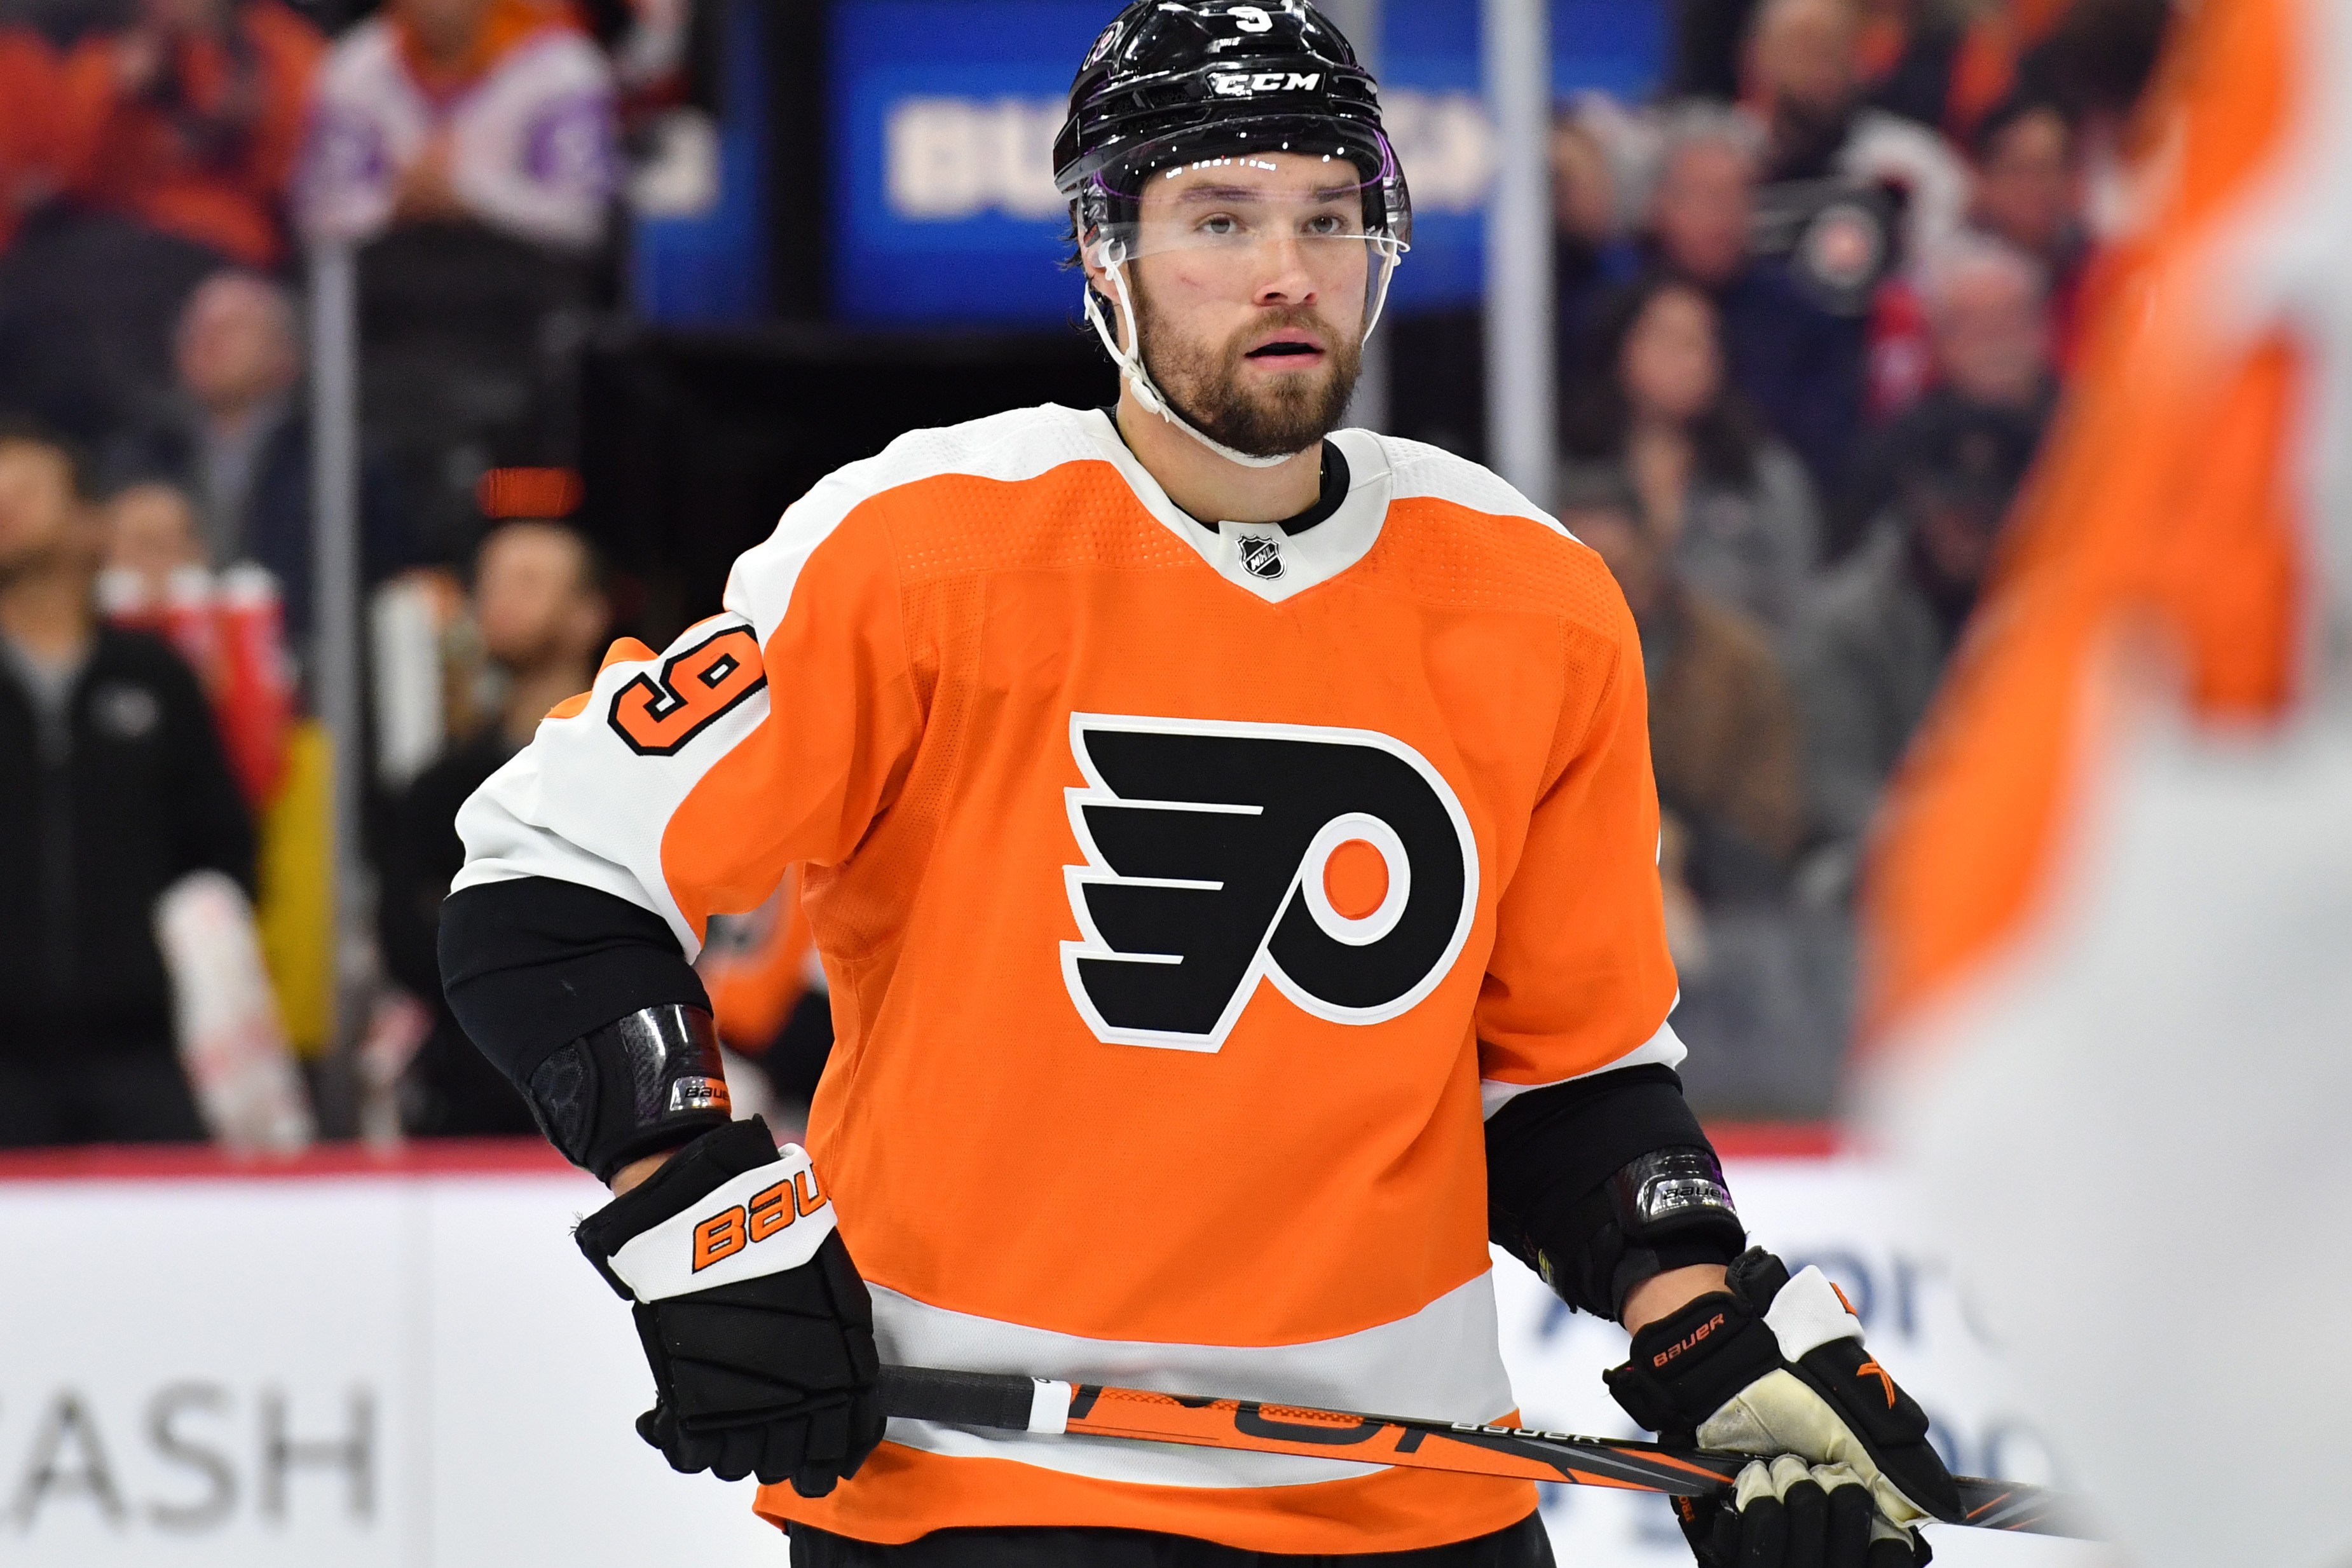 Relocate the Flyers and Give Philadelphia a New Expansion Team